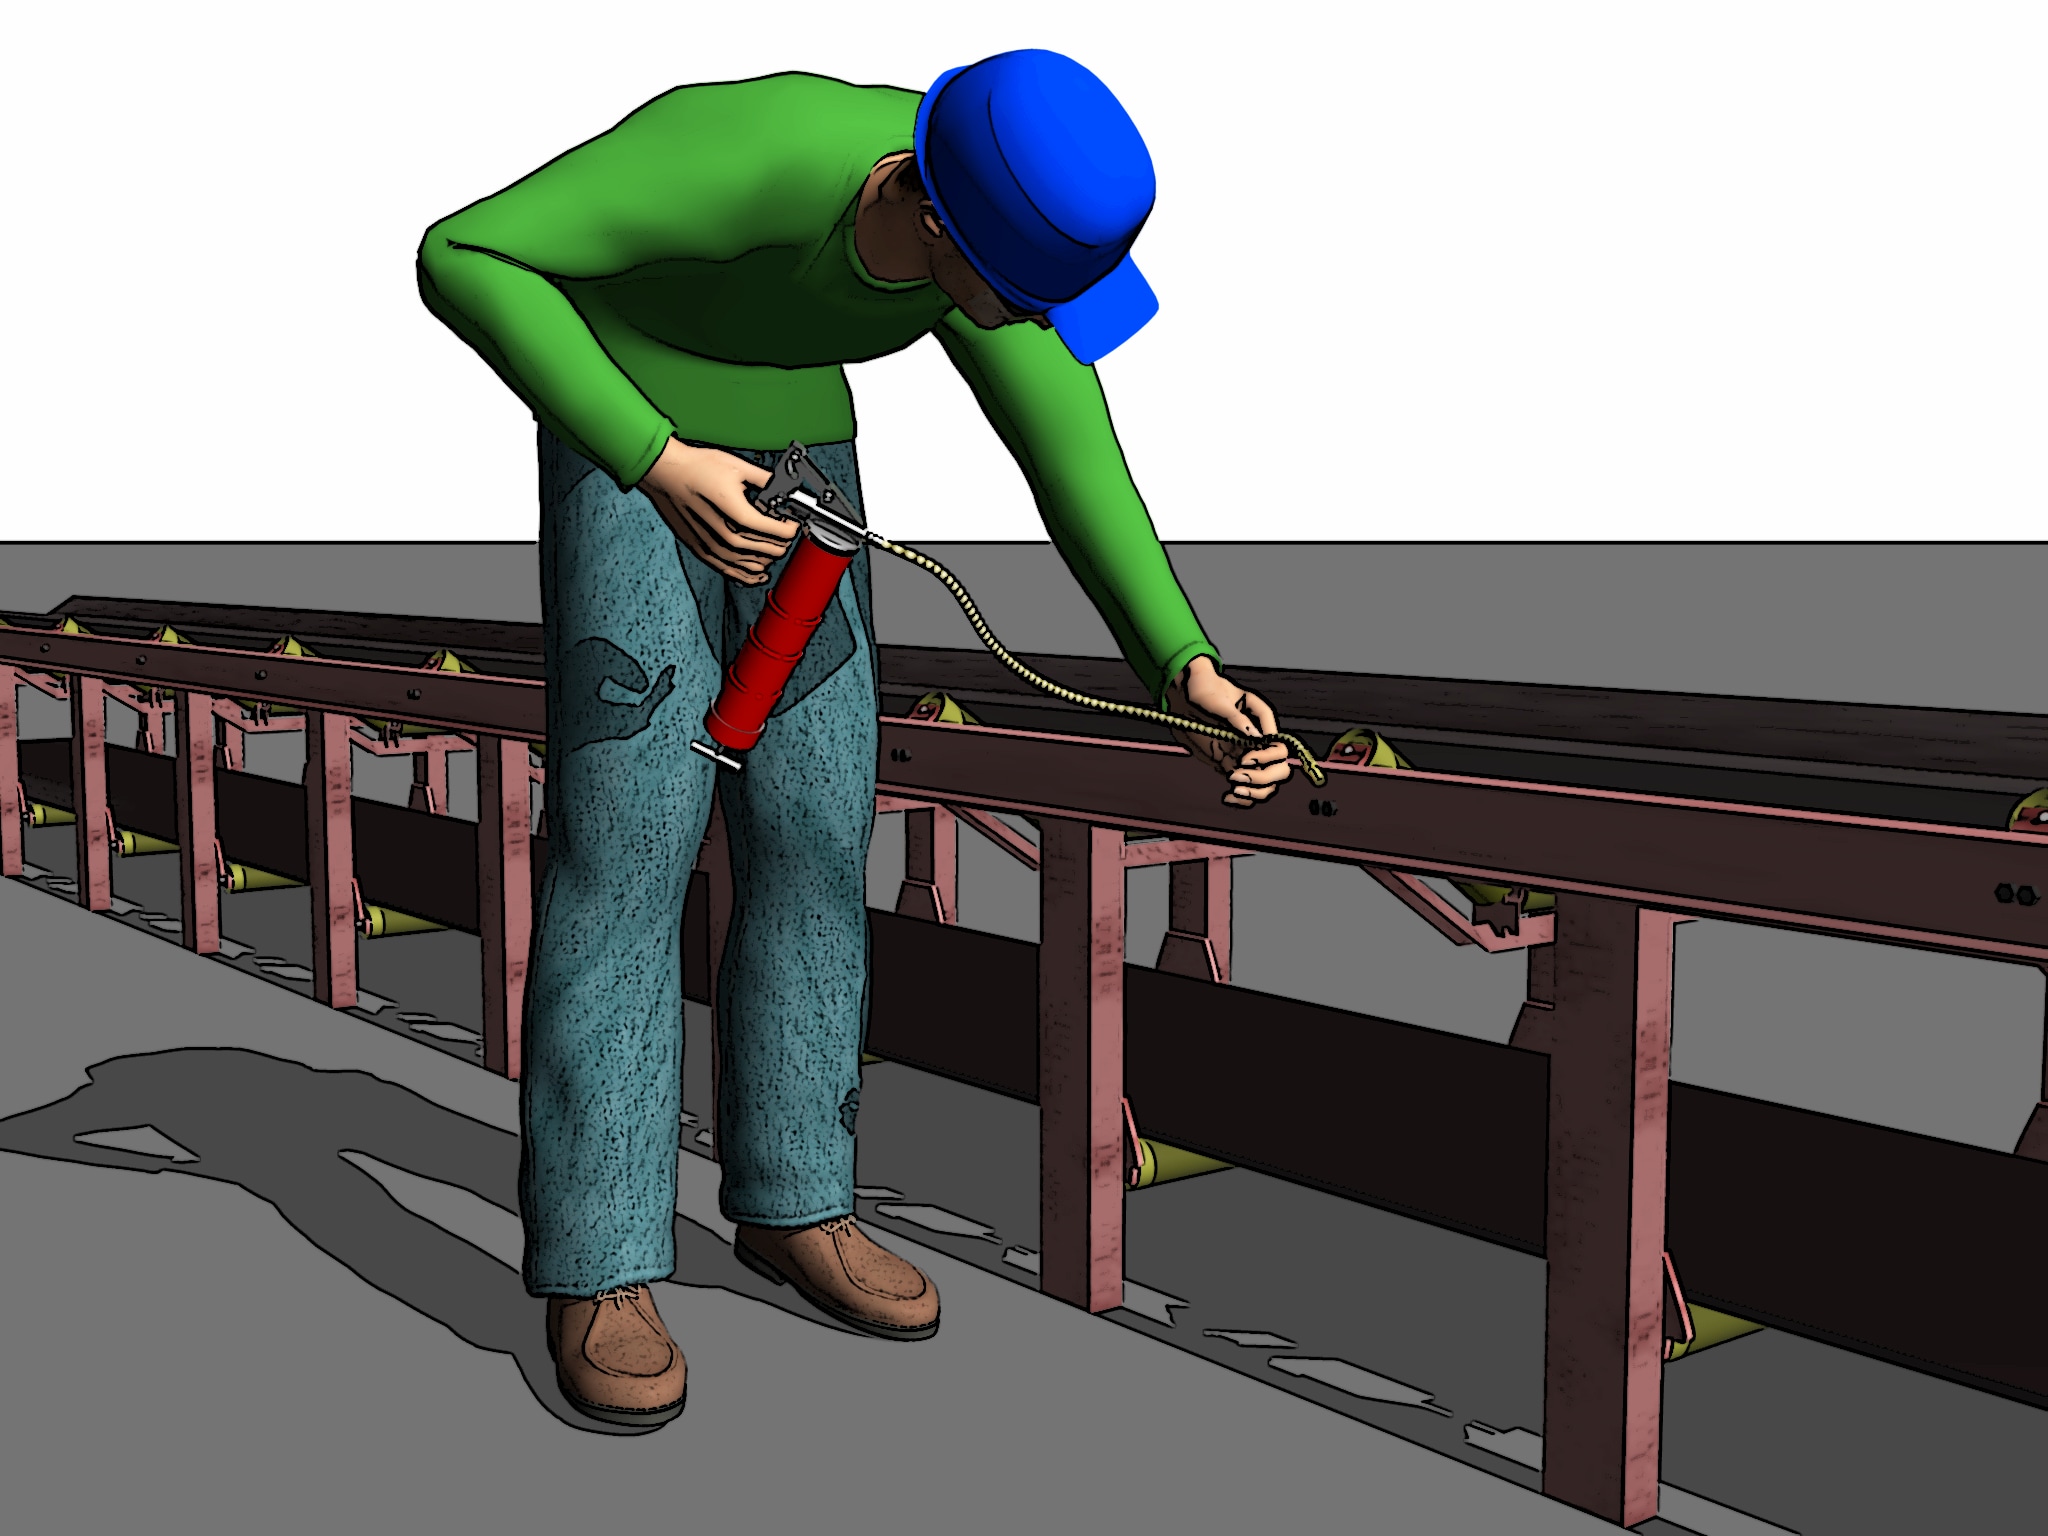 This image shows a worker bending over to grease a conveyor belt.